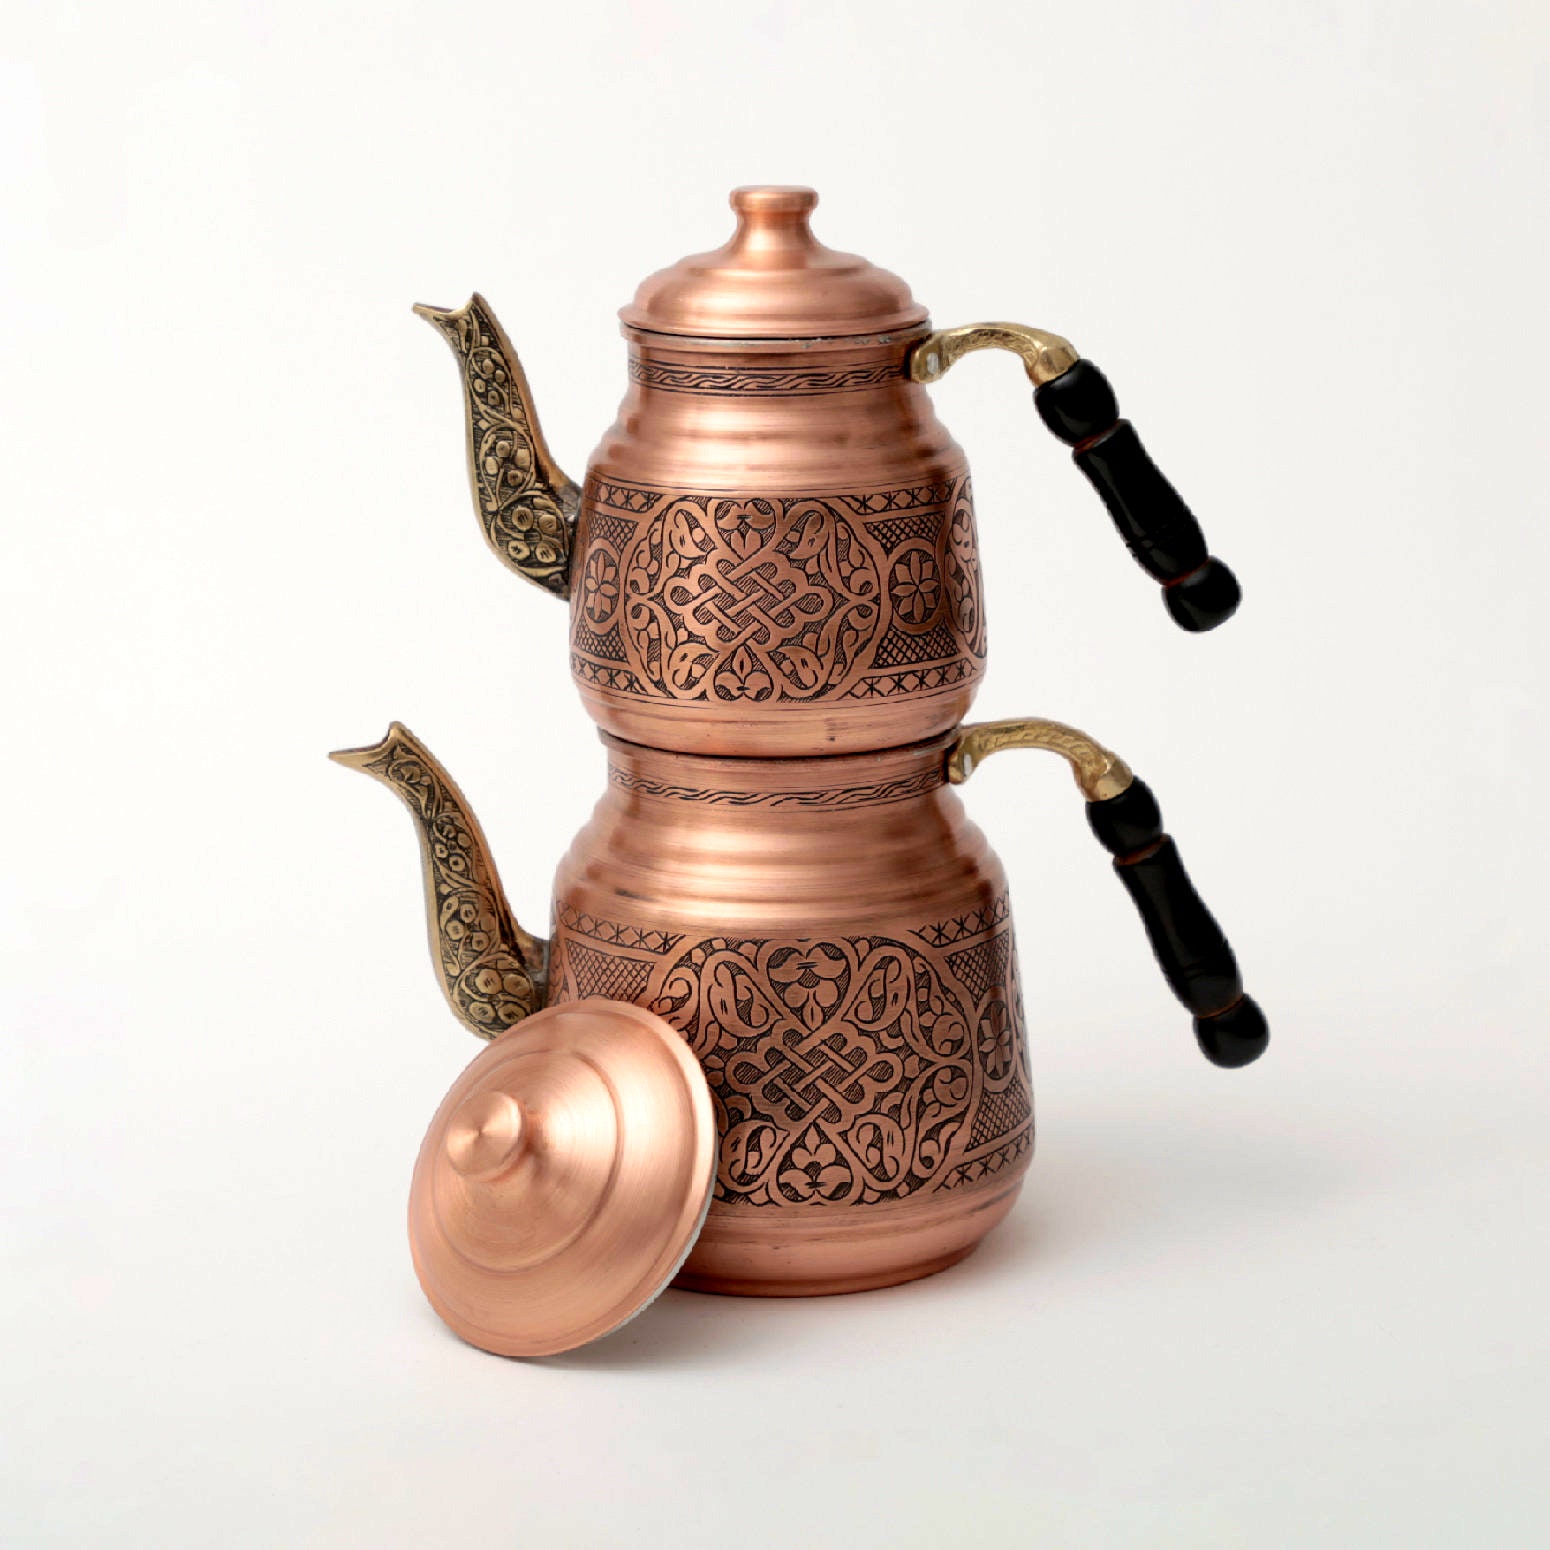 Handmade Copper Turkish Tea Pots, Thickest Copper Double Teapot Set for  Stovetop, Decorated and Painted Samovar Style Vintage Tea Kettle Pot with  Brass and Wooden Handle 